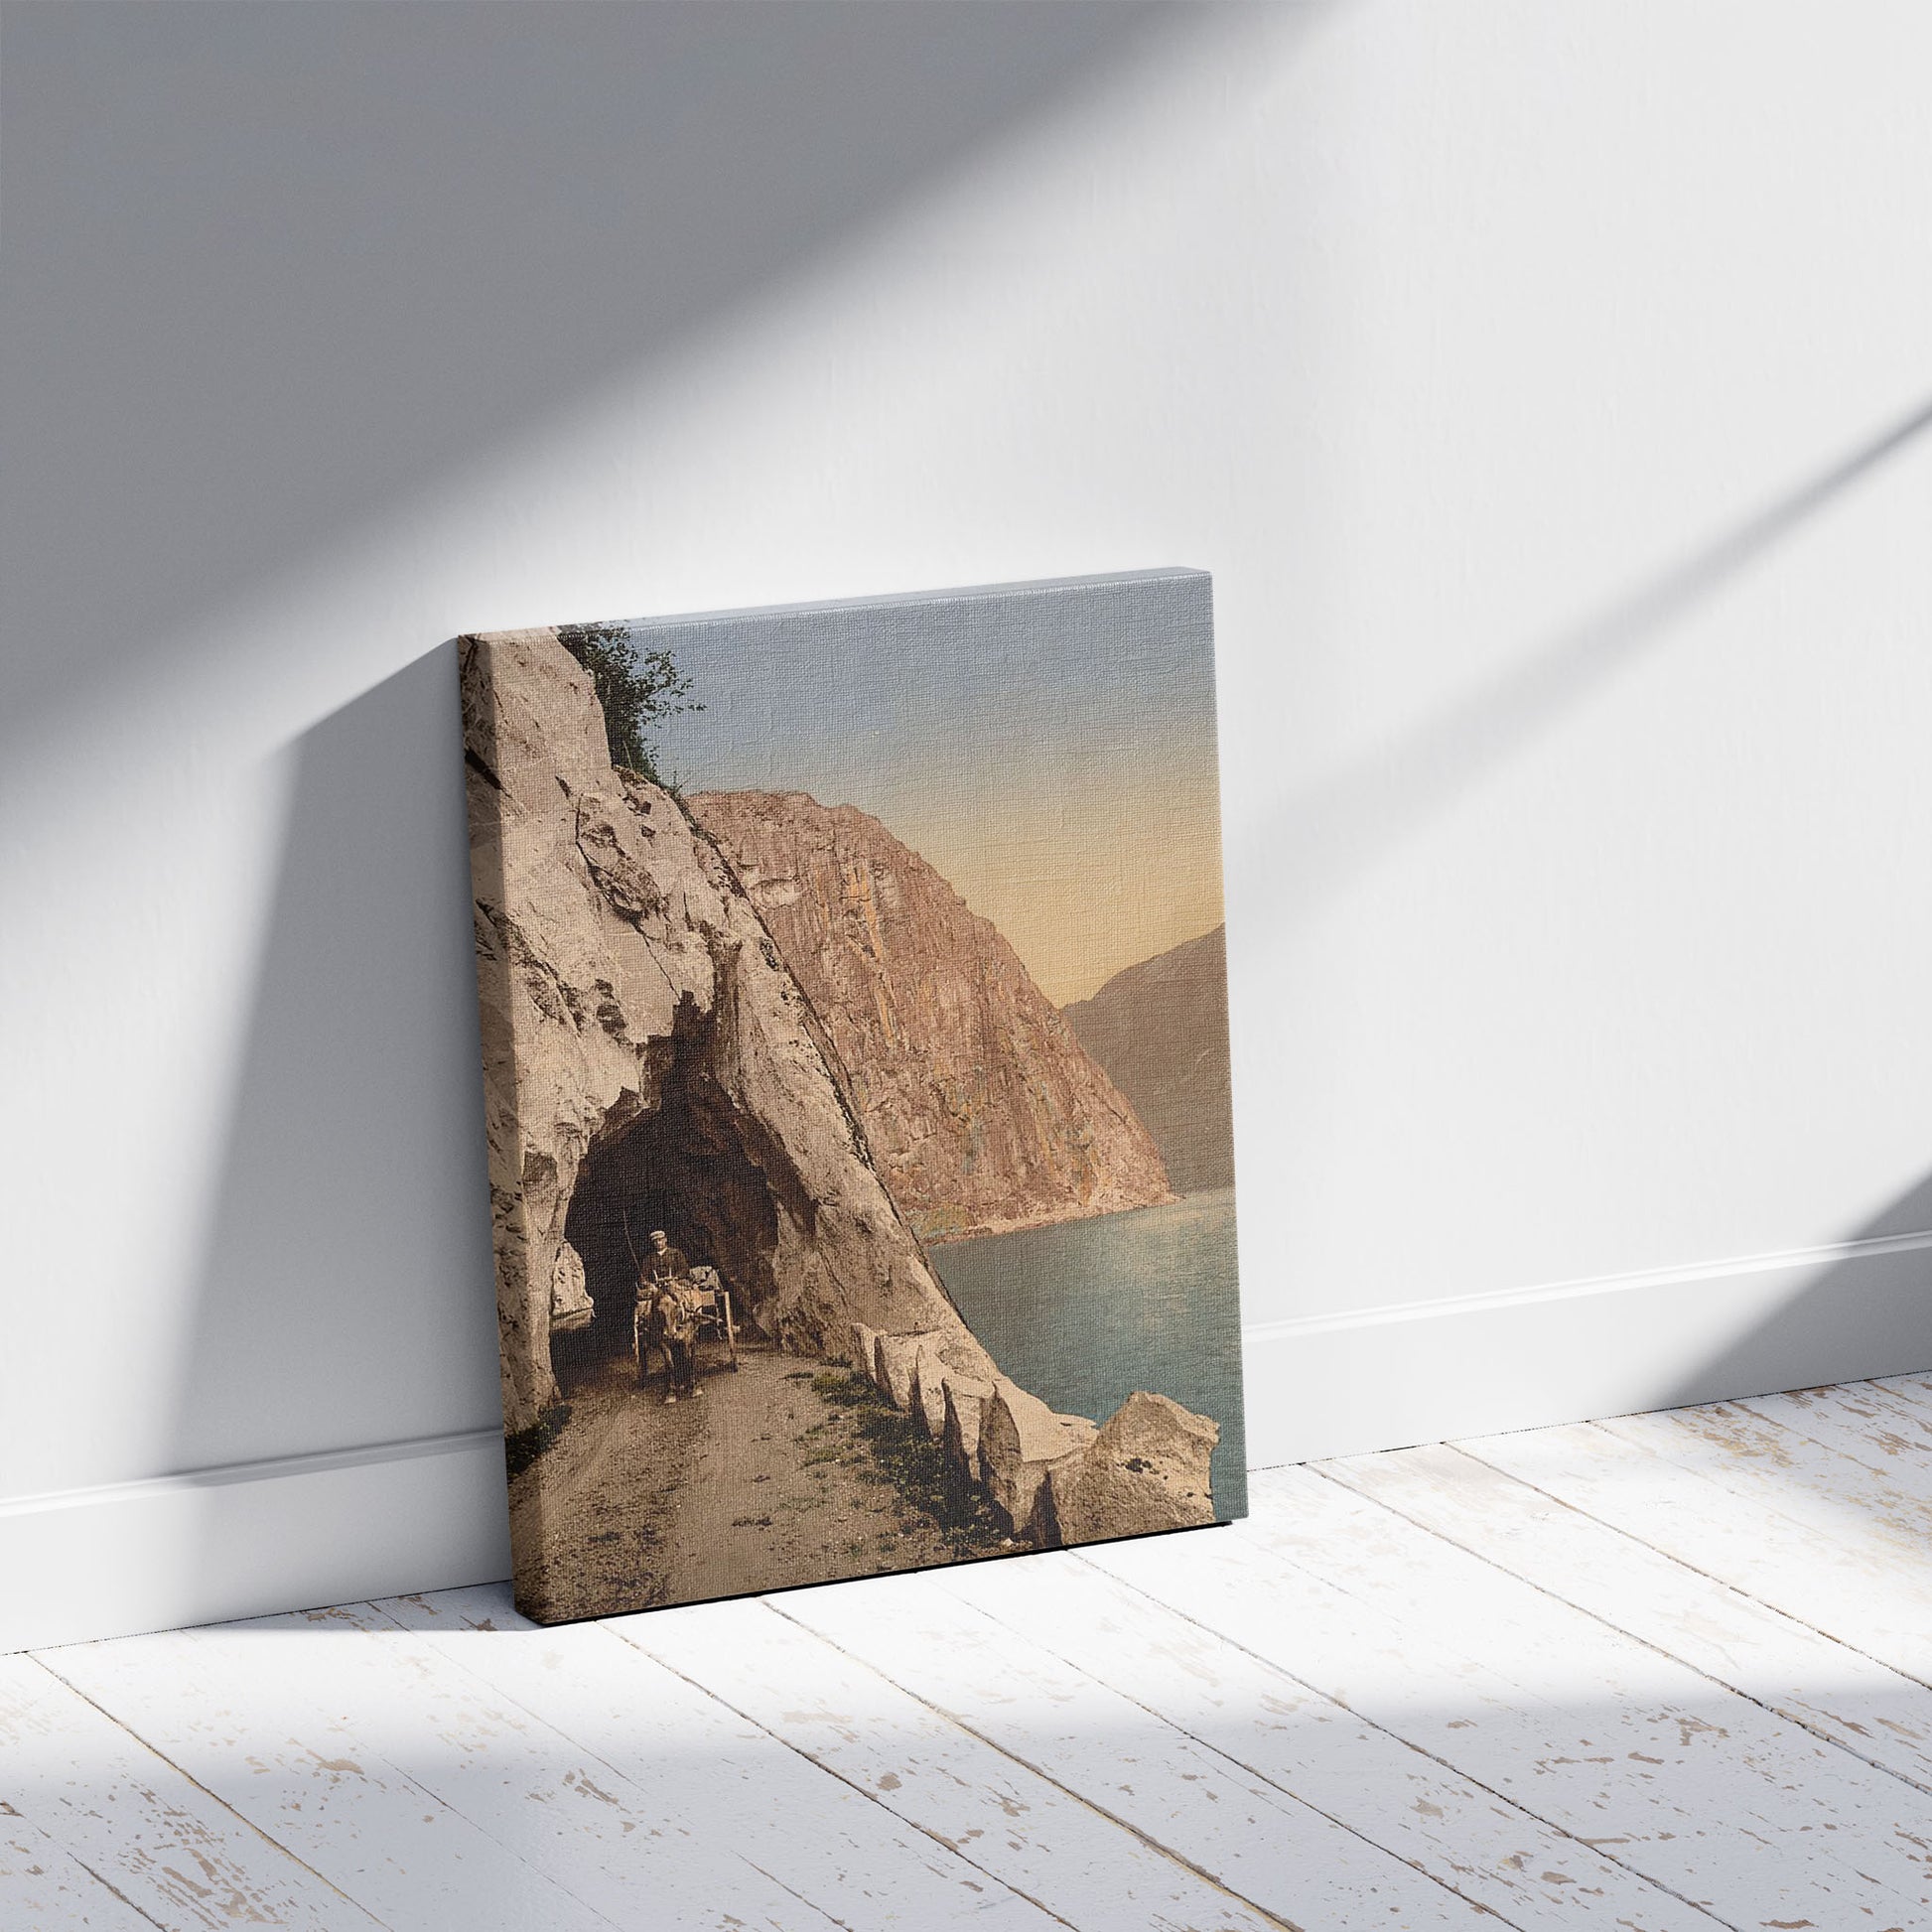 A picture of Road to Vorinfos (i.e., Vøringsfoss)  Hardanger Fjord, Norway, a mockup of the print leaning against a wall